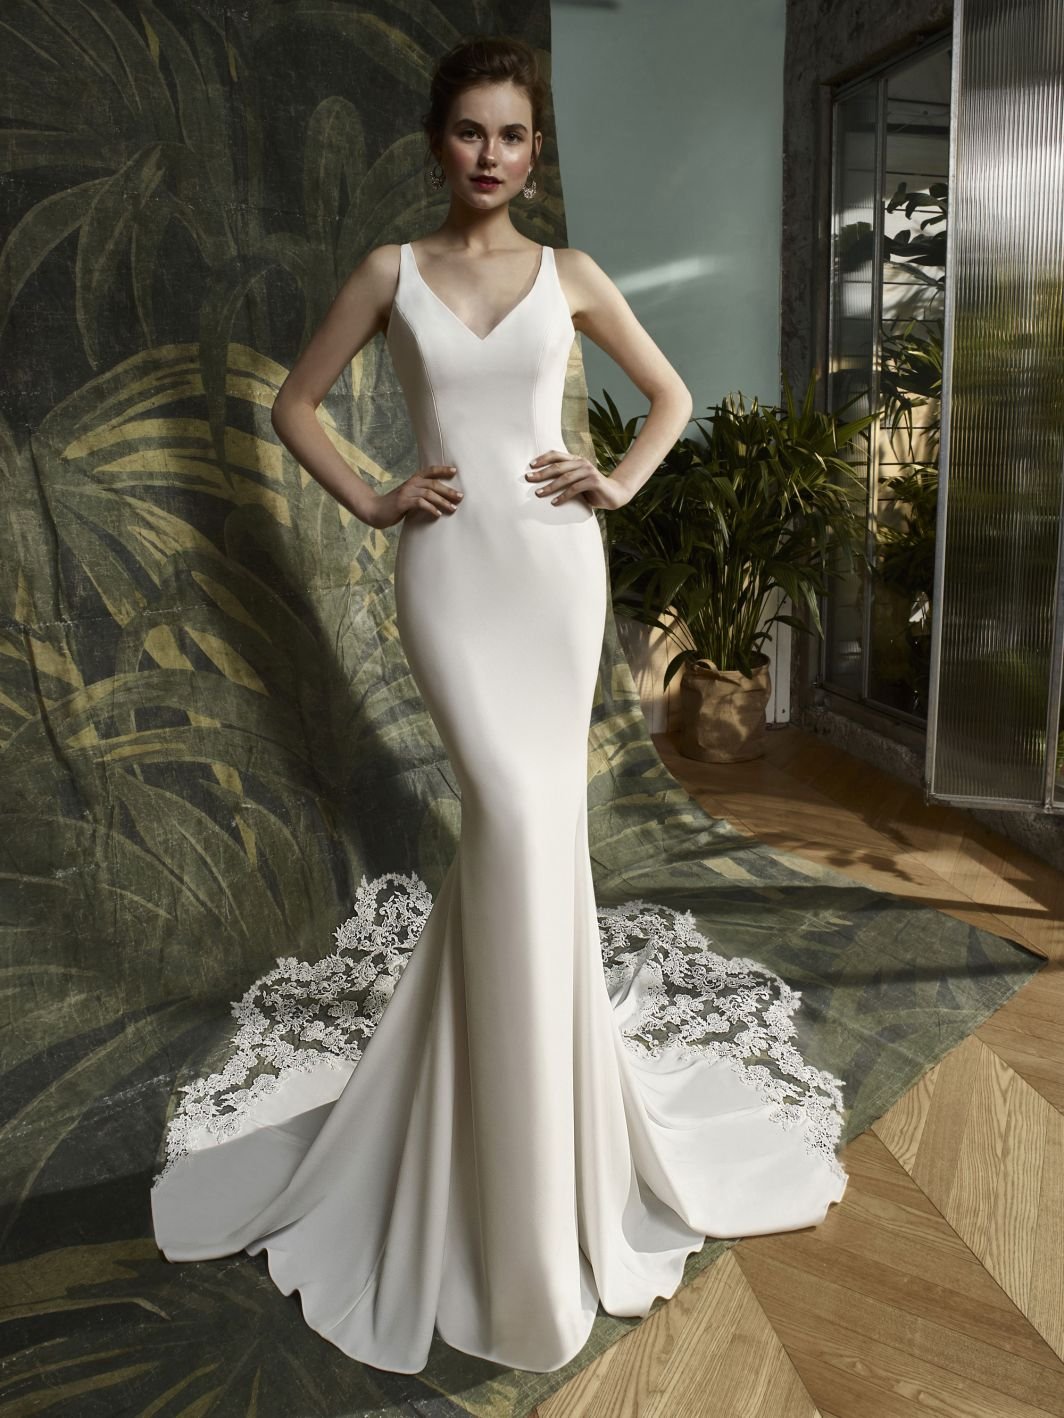 SHOP SAMPLE GOWNS — The White Gown